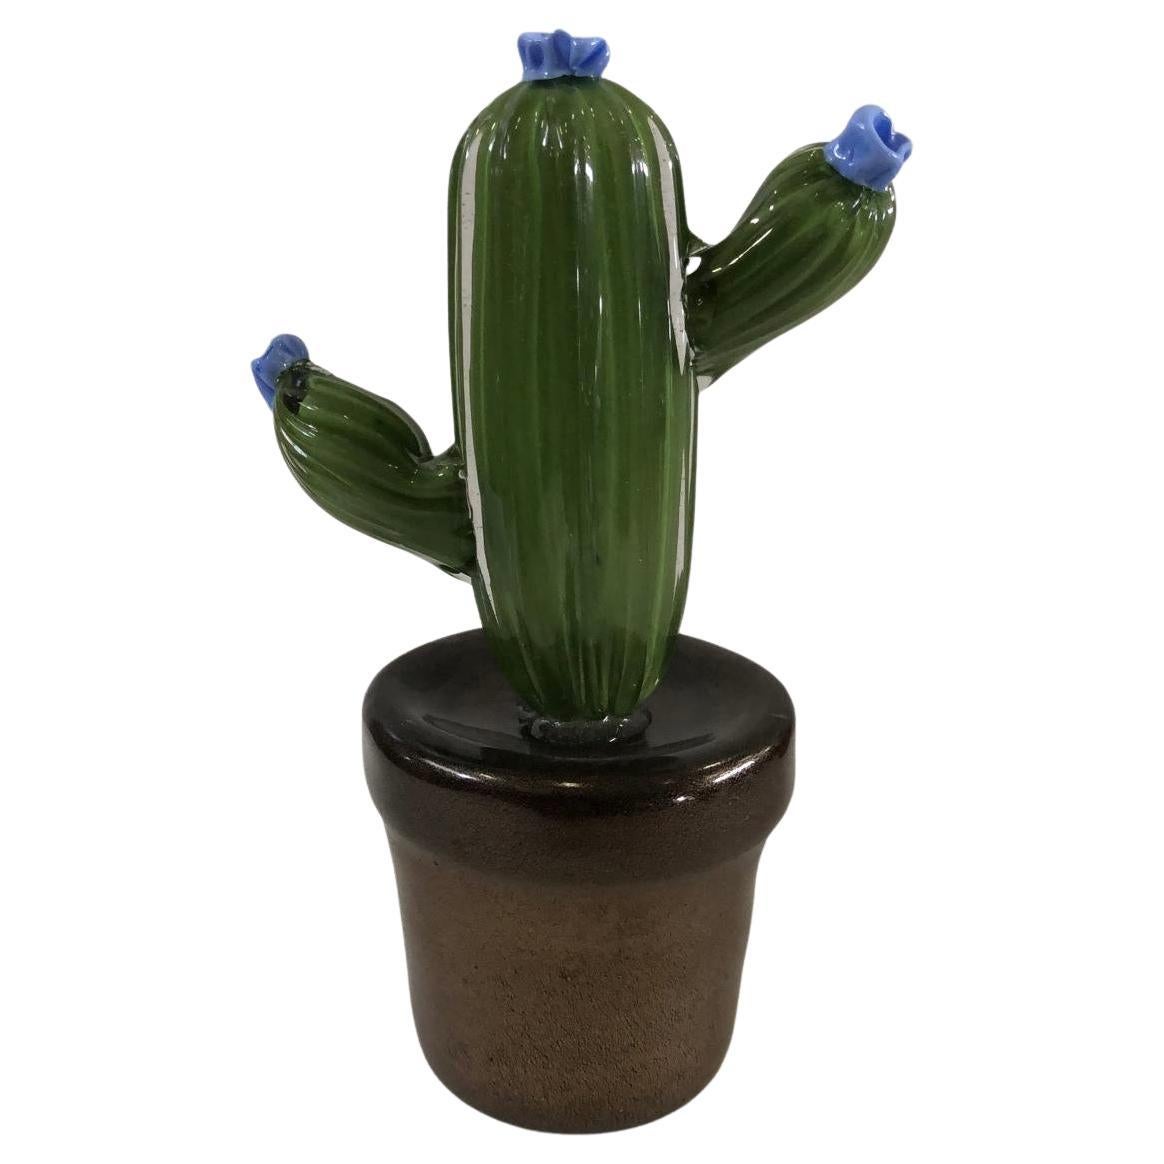 Murano Art Glass Water Green Cactus Plant, 1990 For Sale